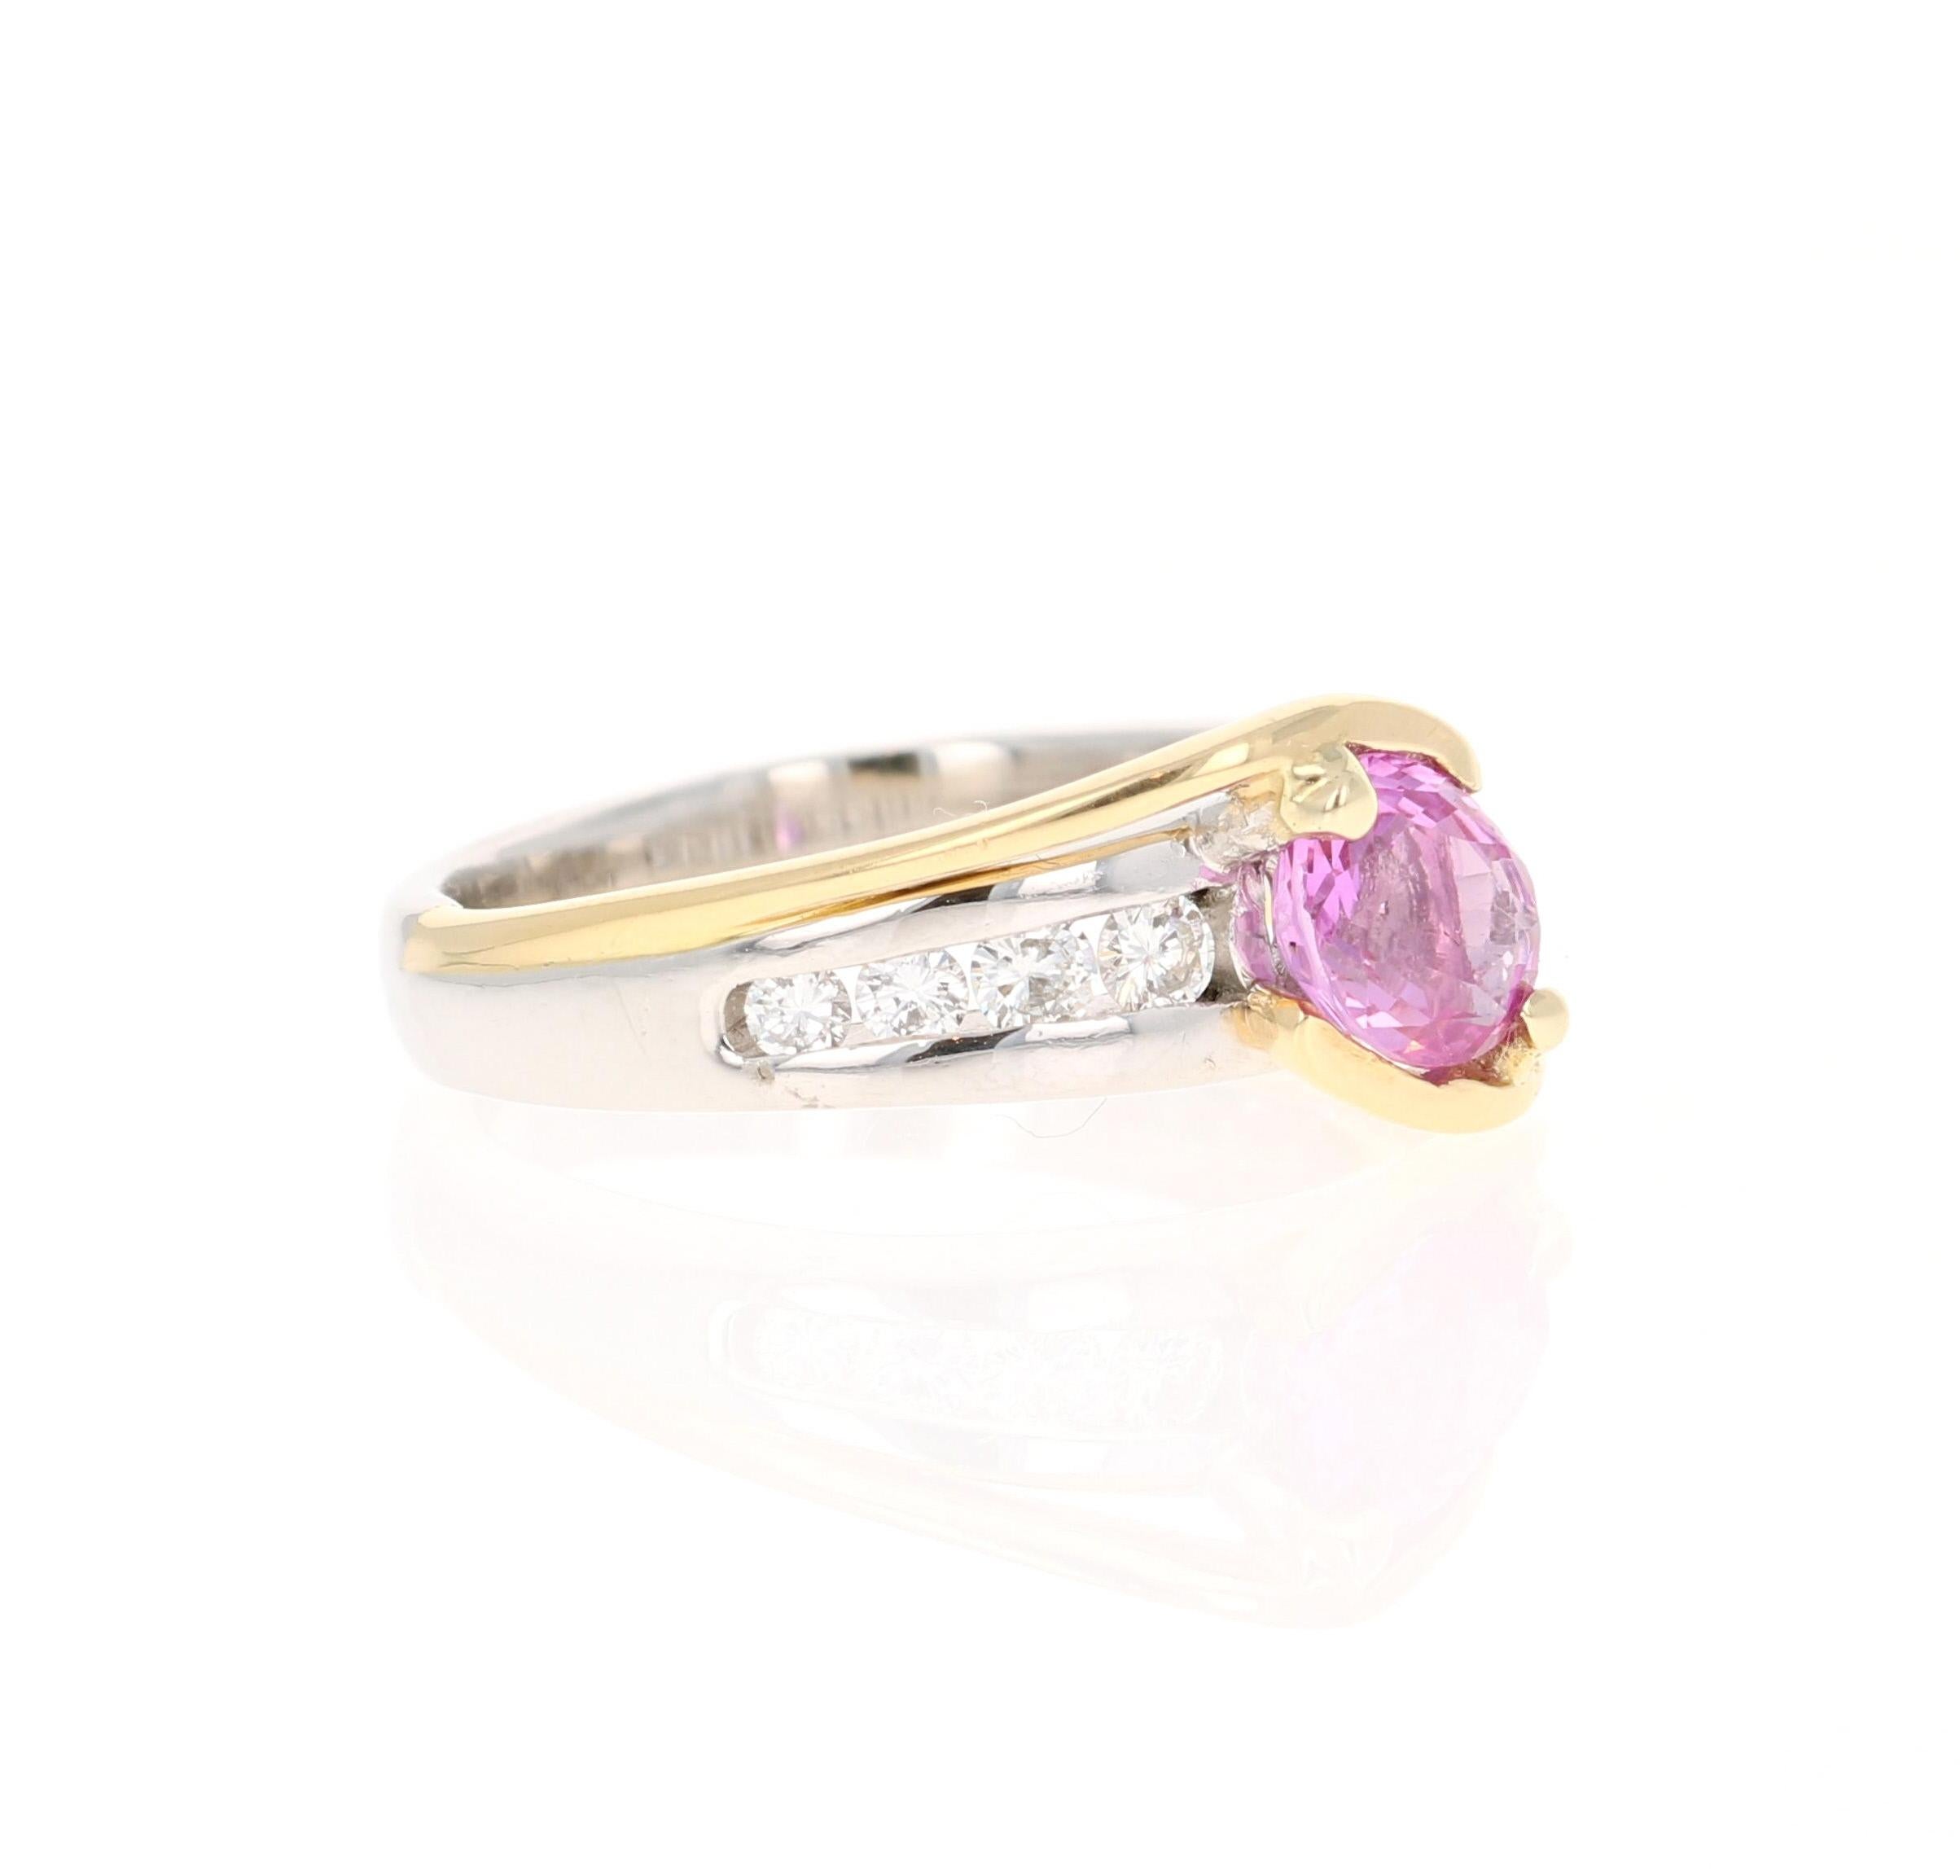 This beautiful ring has an Oval Cut Pink Sapphire that weighs 1.14 carats and has 8 Round Cut Diamonds that weigh 0.50 carats. (Clarity: VS, Color: F)
The total carat weight of the ring is 1.64 carats. 

The ring is beautifully set in 18 Karat Gold